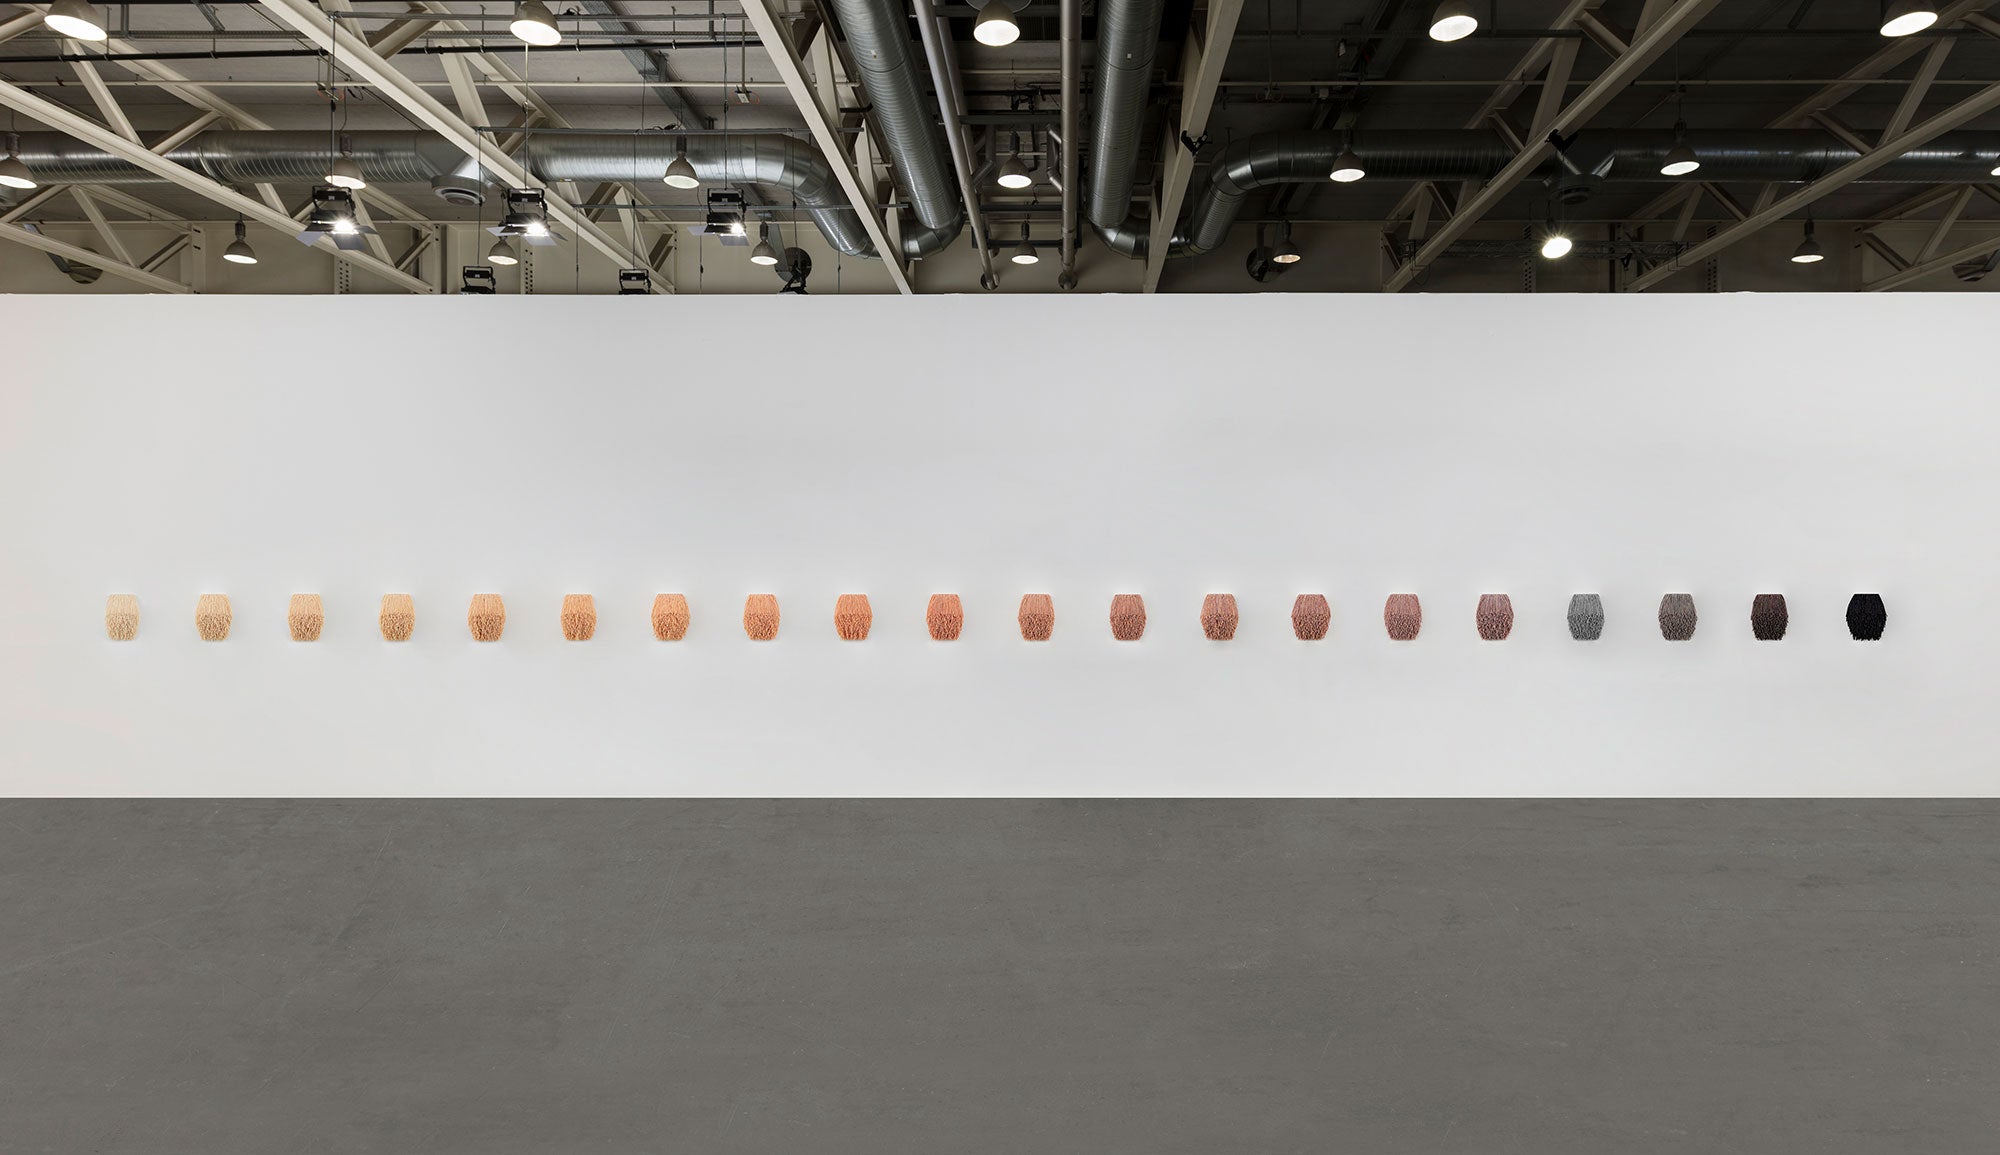 Massimo De Carlo Paola Pivi, Call Me Anything You Want, 2013. Courtesy of the artist and the gallery. Vía Art Basel